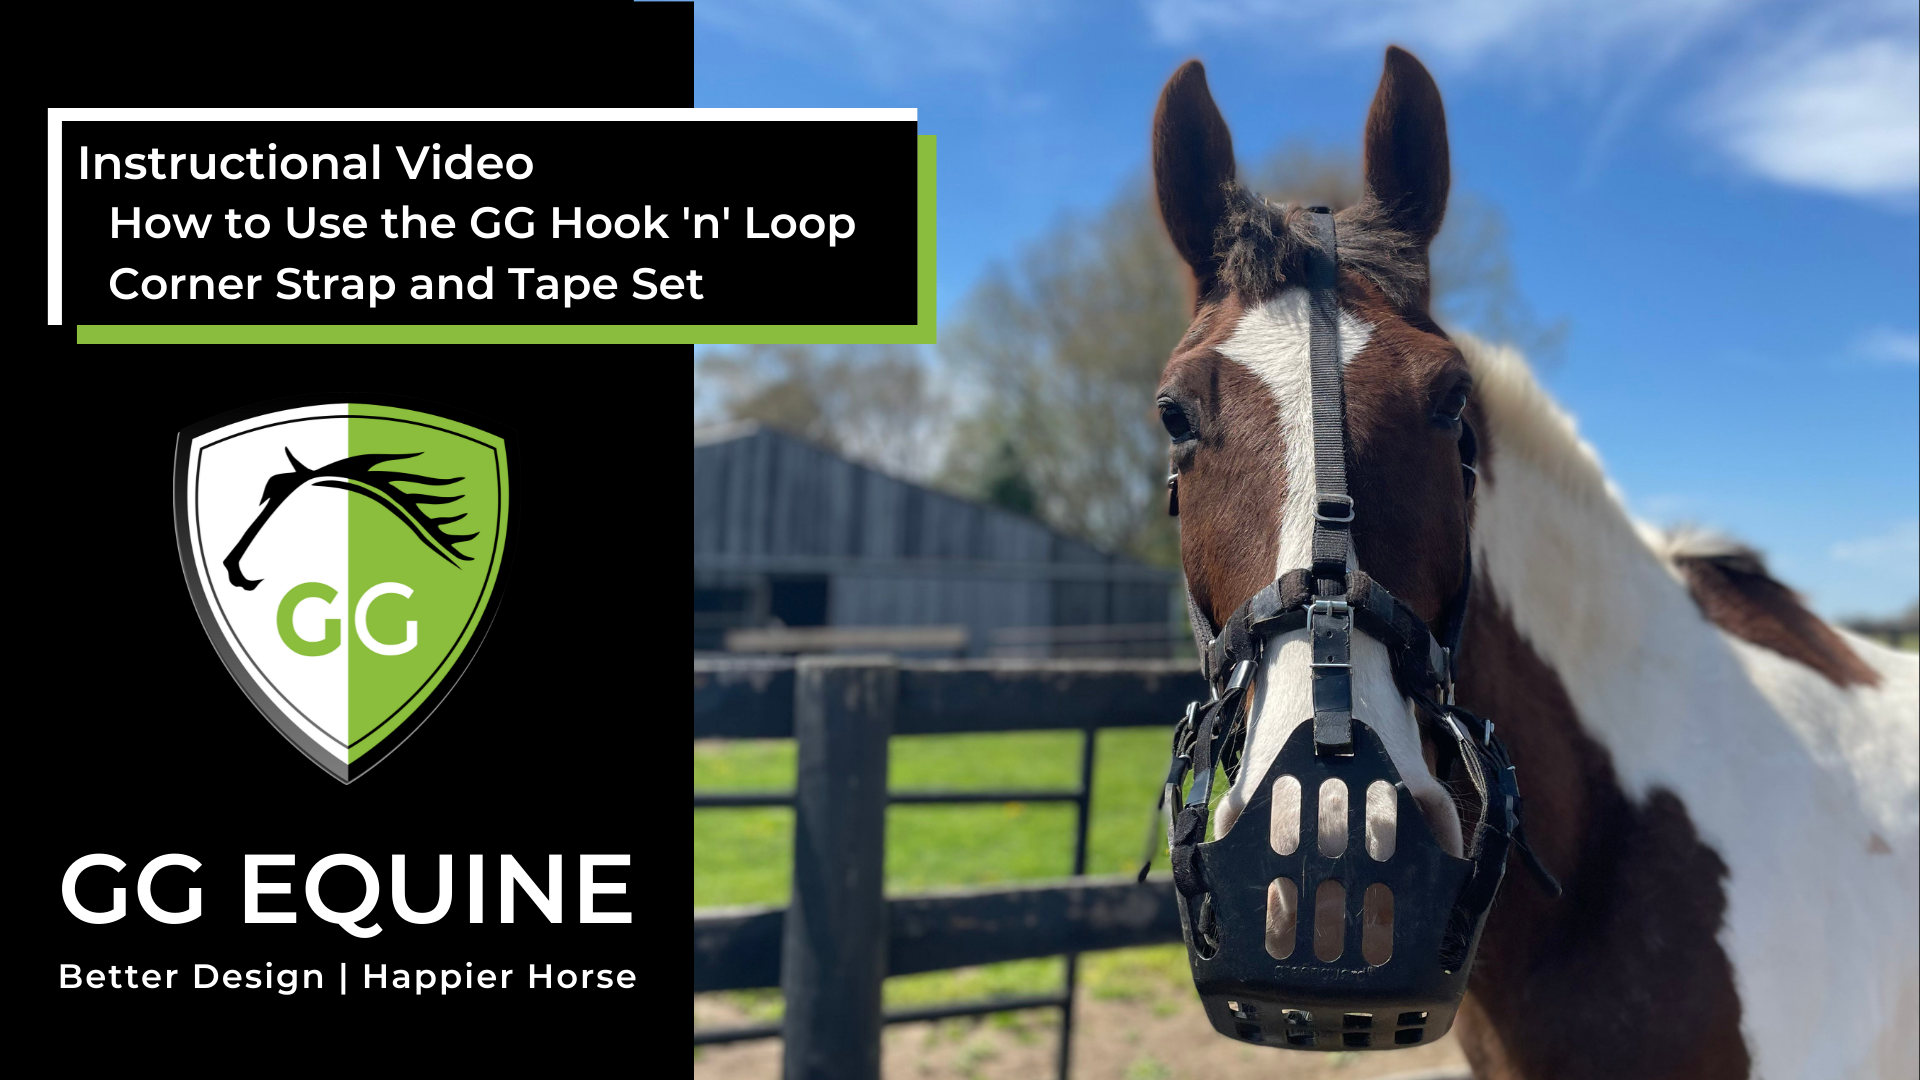 Load video: The primary instruction and tutorial video on how to use the hook and loop (read: velcro) strap set from GG Equine.